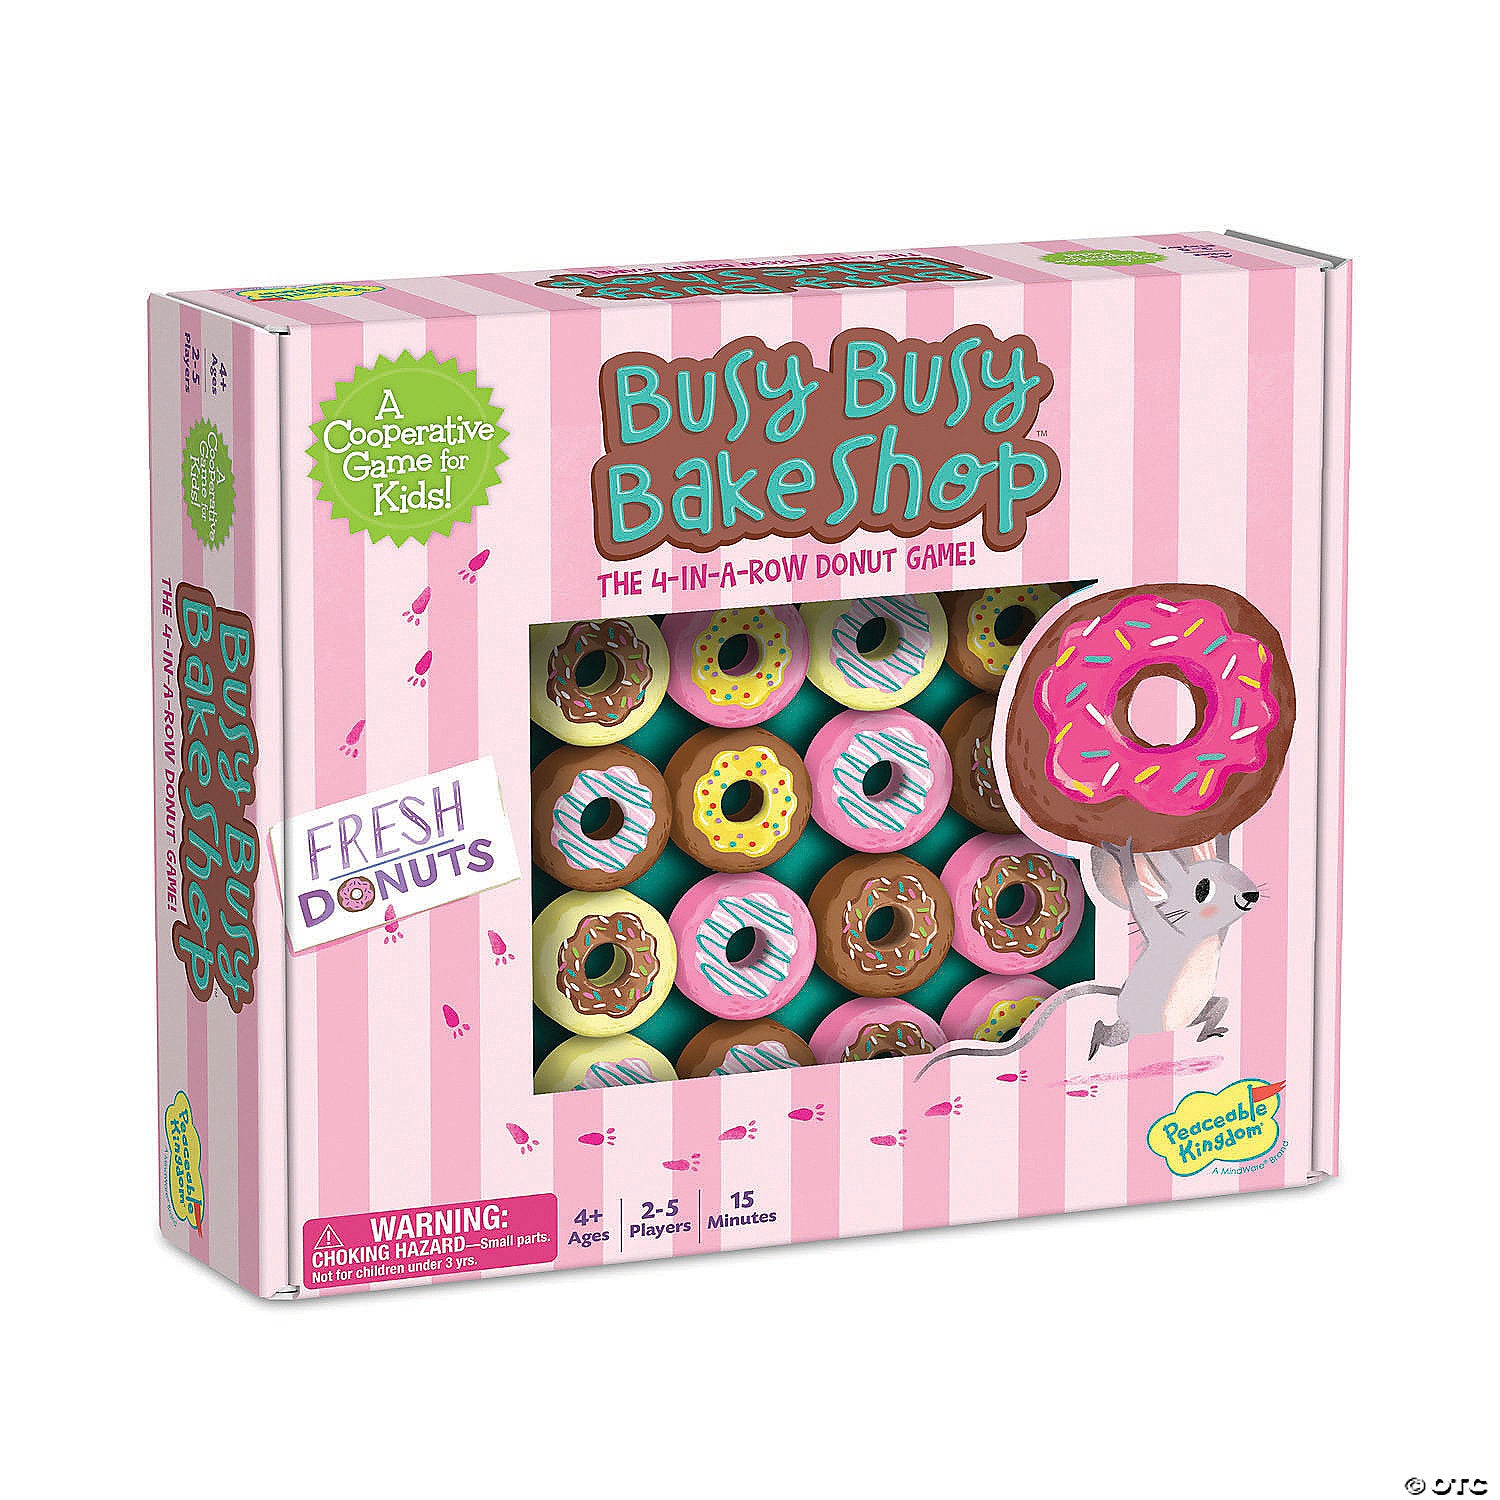 Busy Busy Bake Shop Game by Peaceable Kingdom